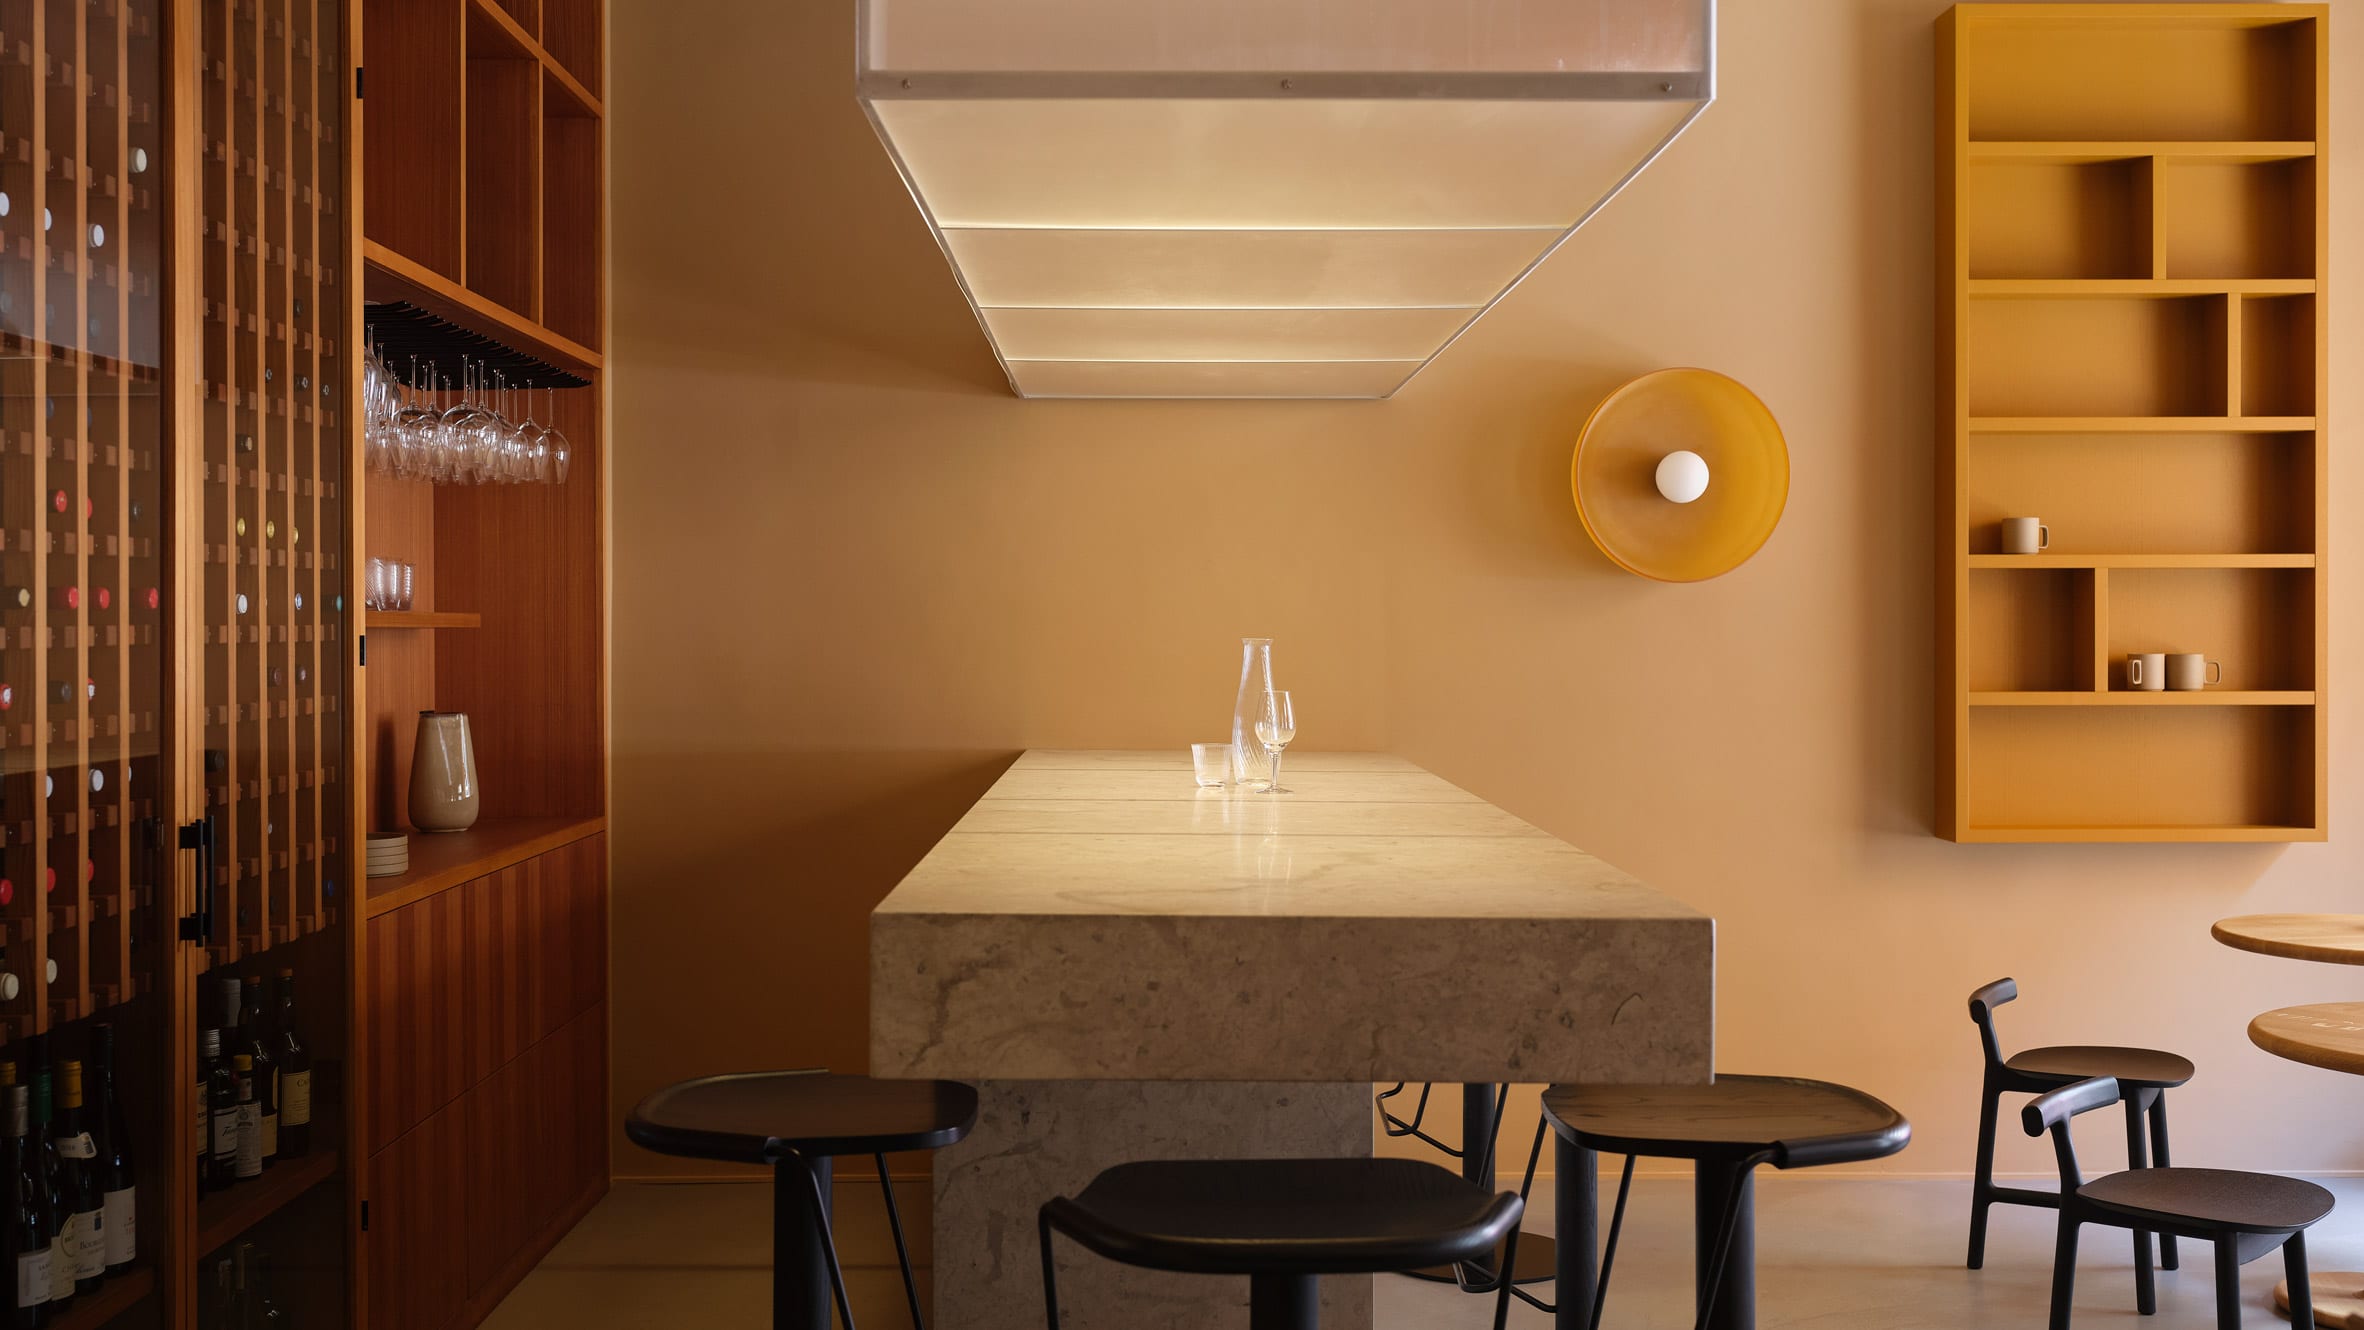 Note Design Studio creates warm-hued wine bar that doubles as an office